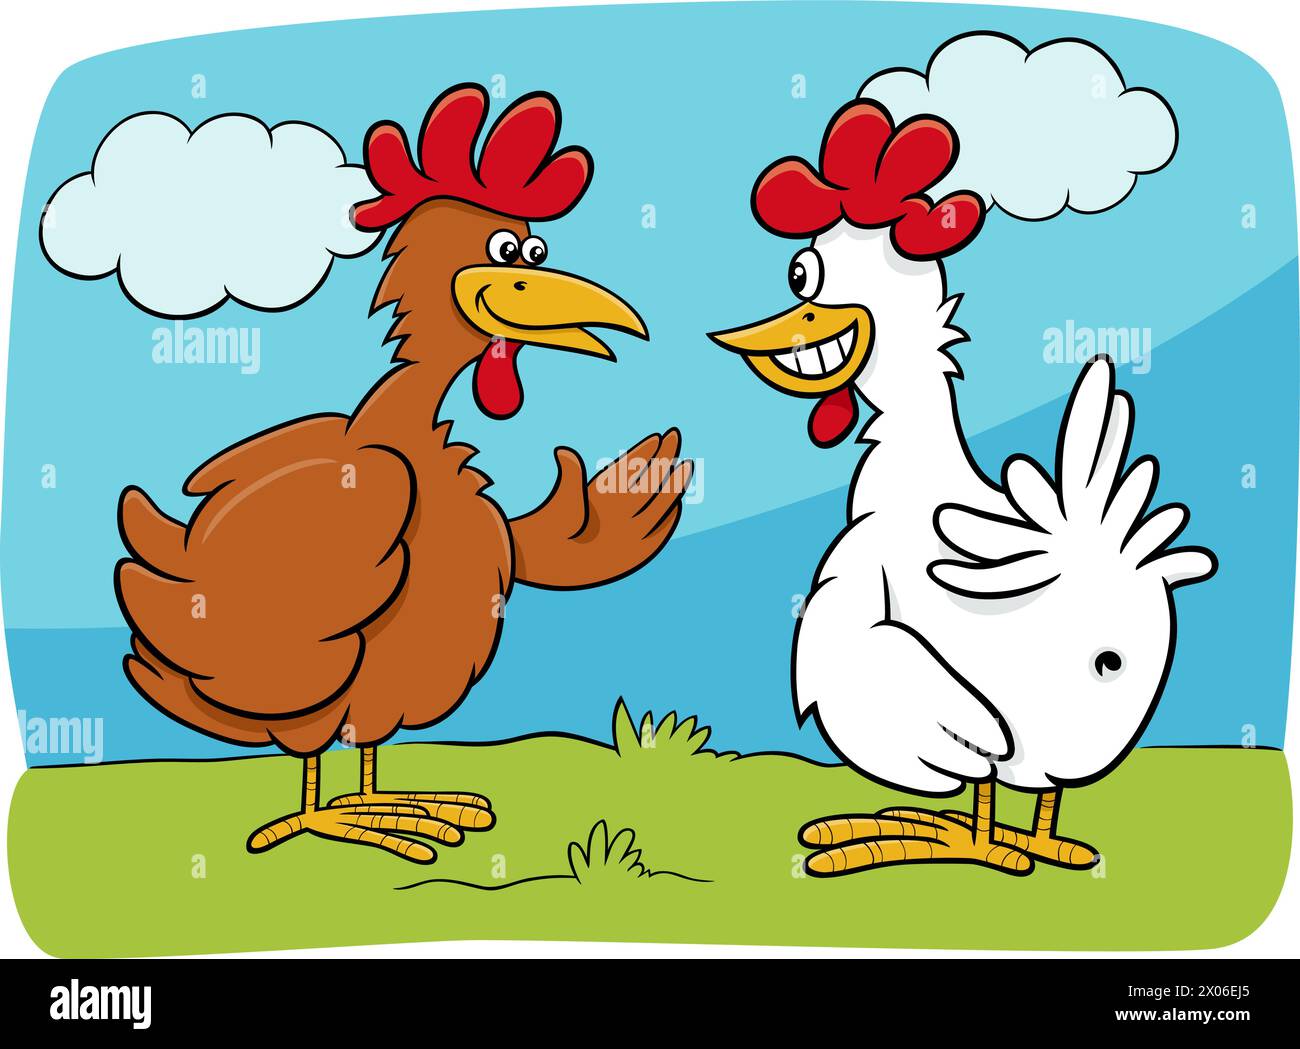 Cartoon illustration of two chickens farm birds characters talking Stock Vector